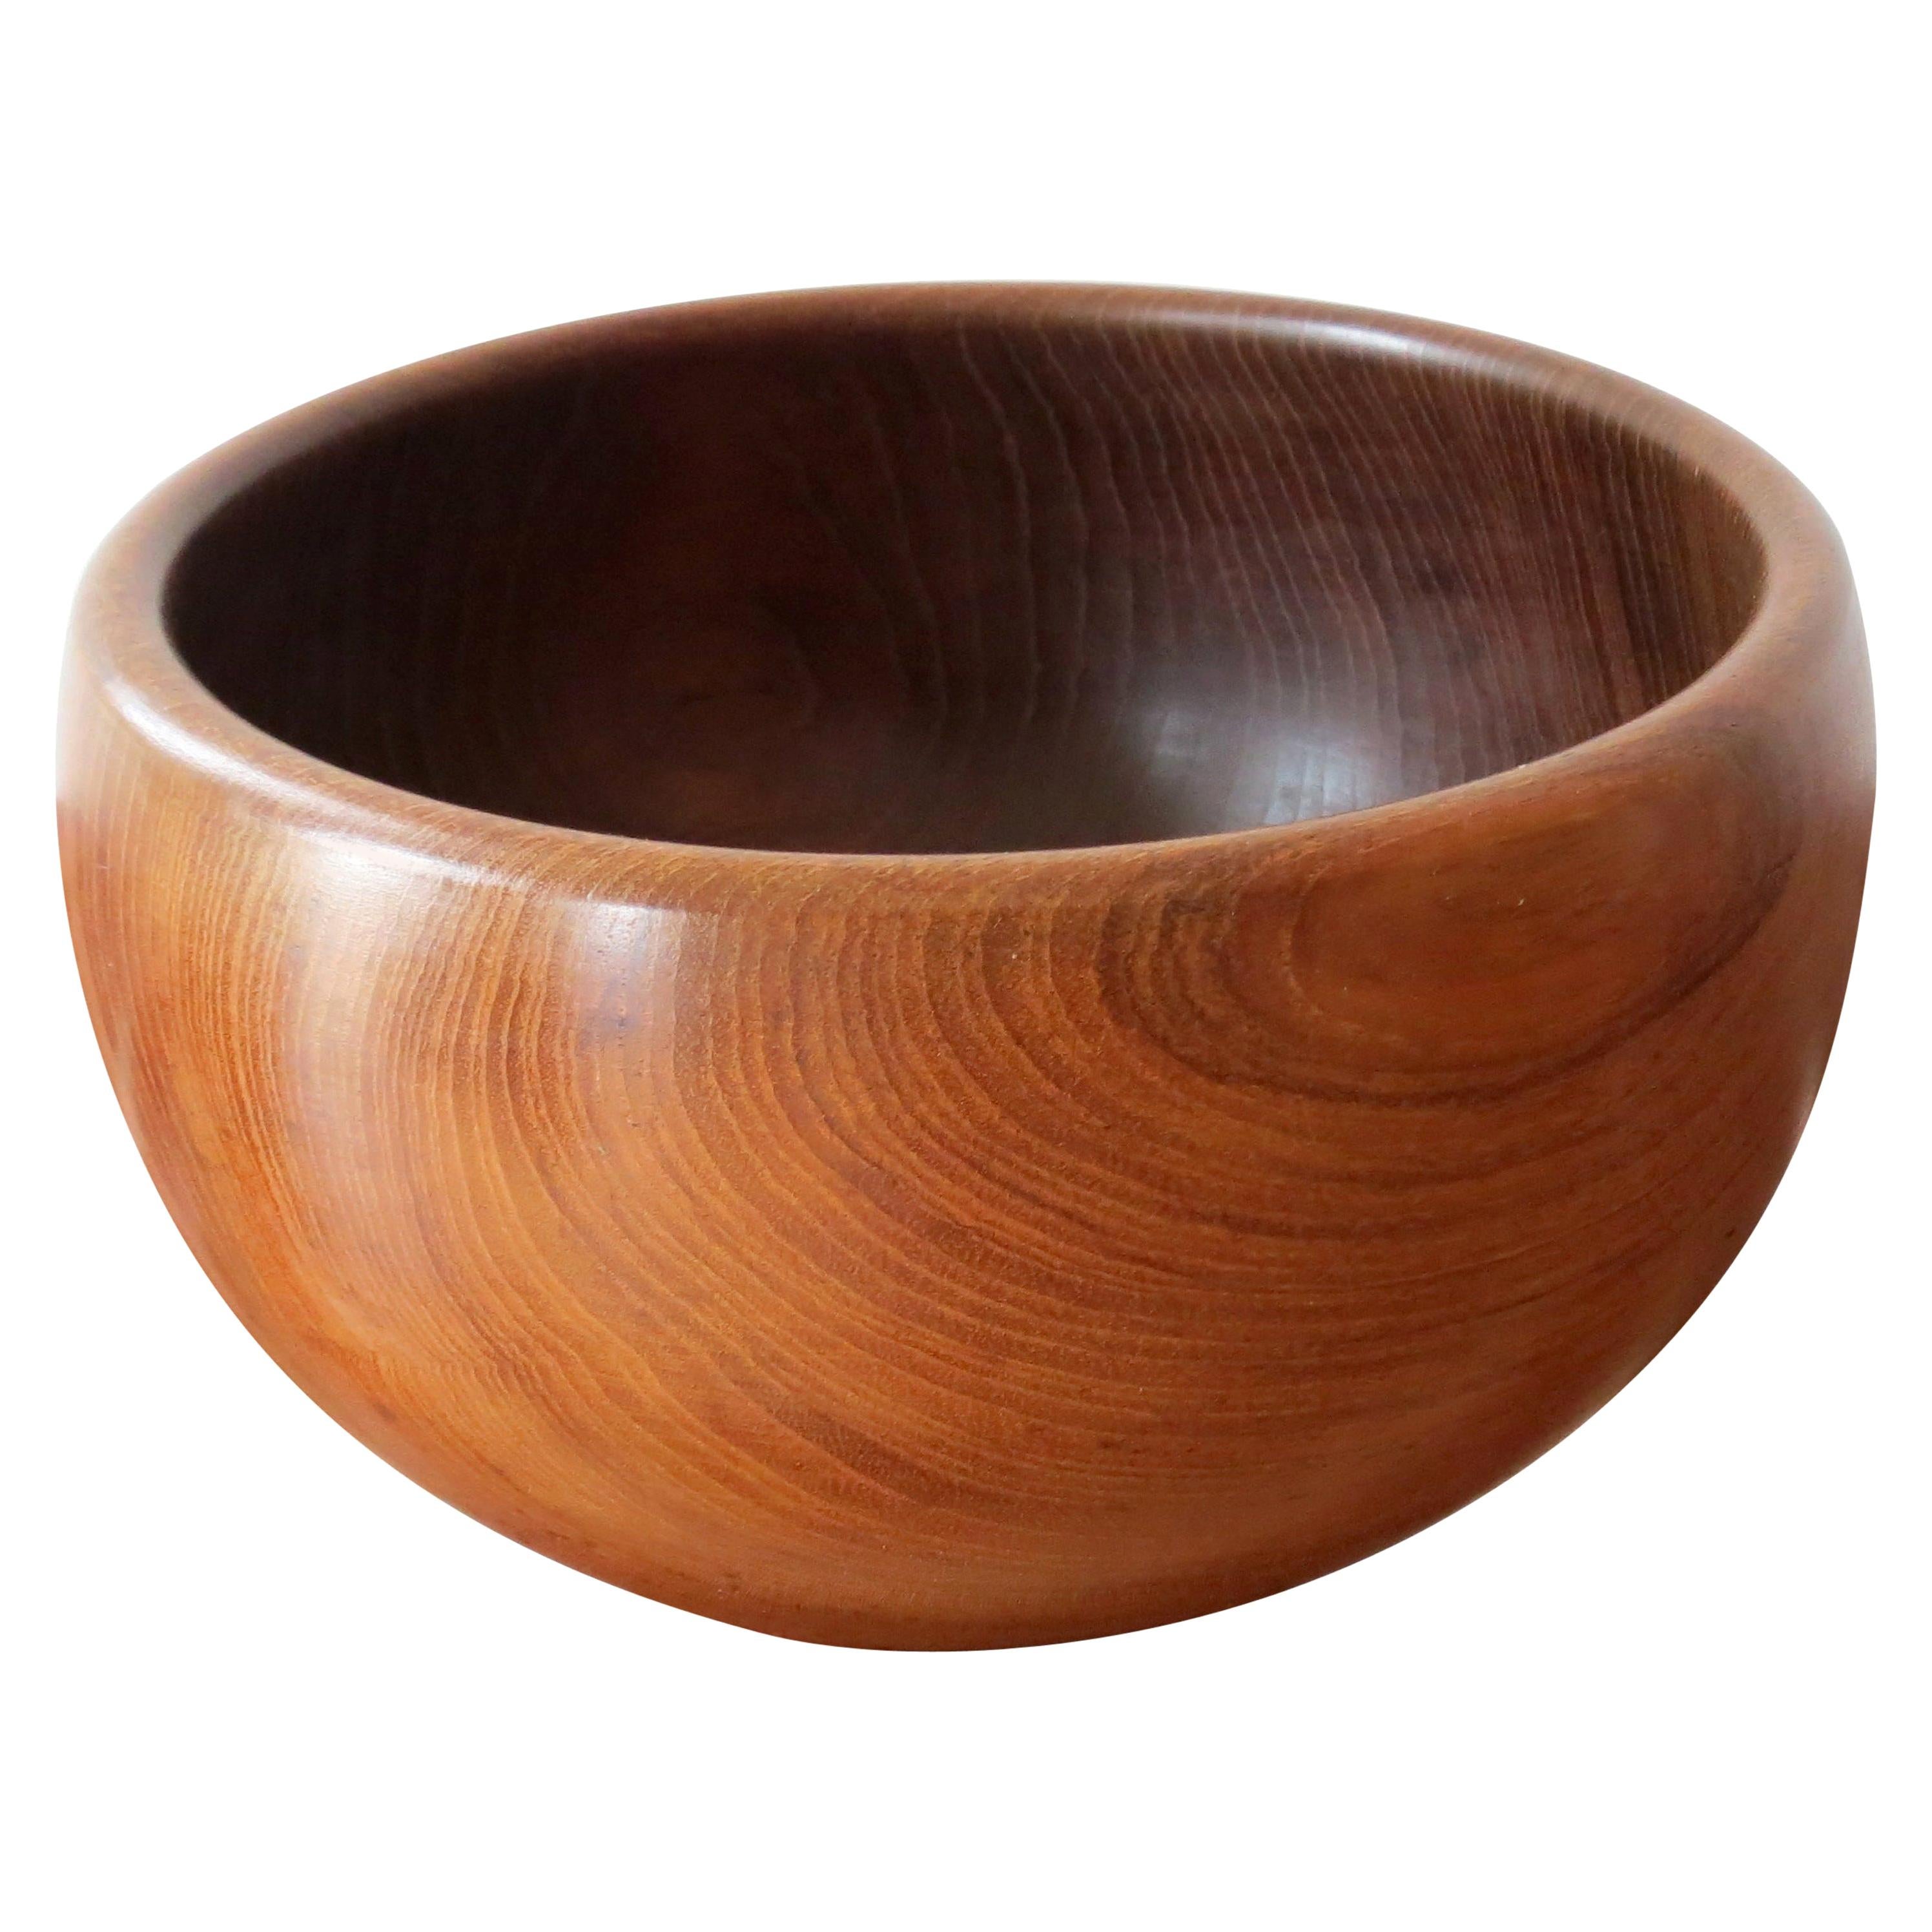 Midcentury Large Handcrafted Teak Wooden Bowl by Galatix, England, 1970s